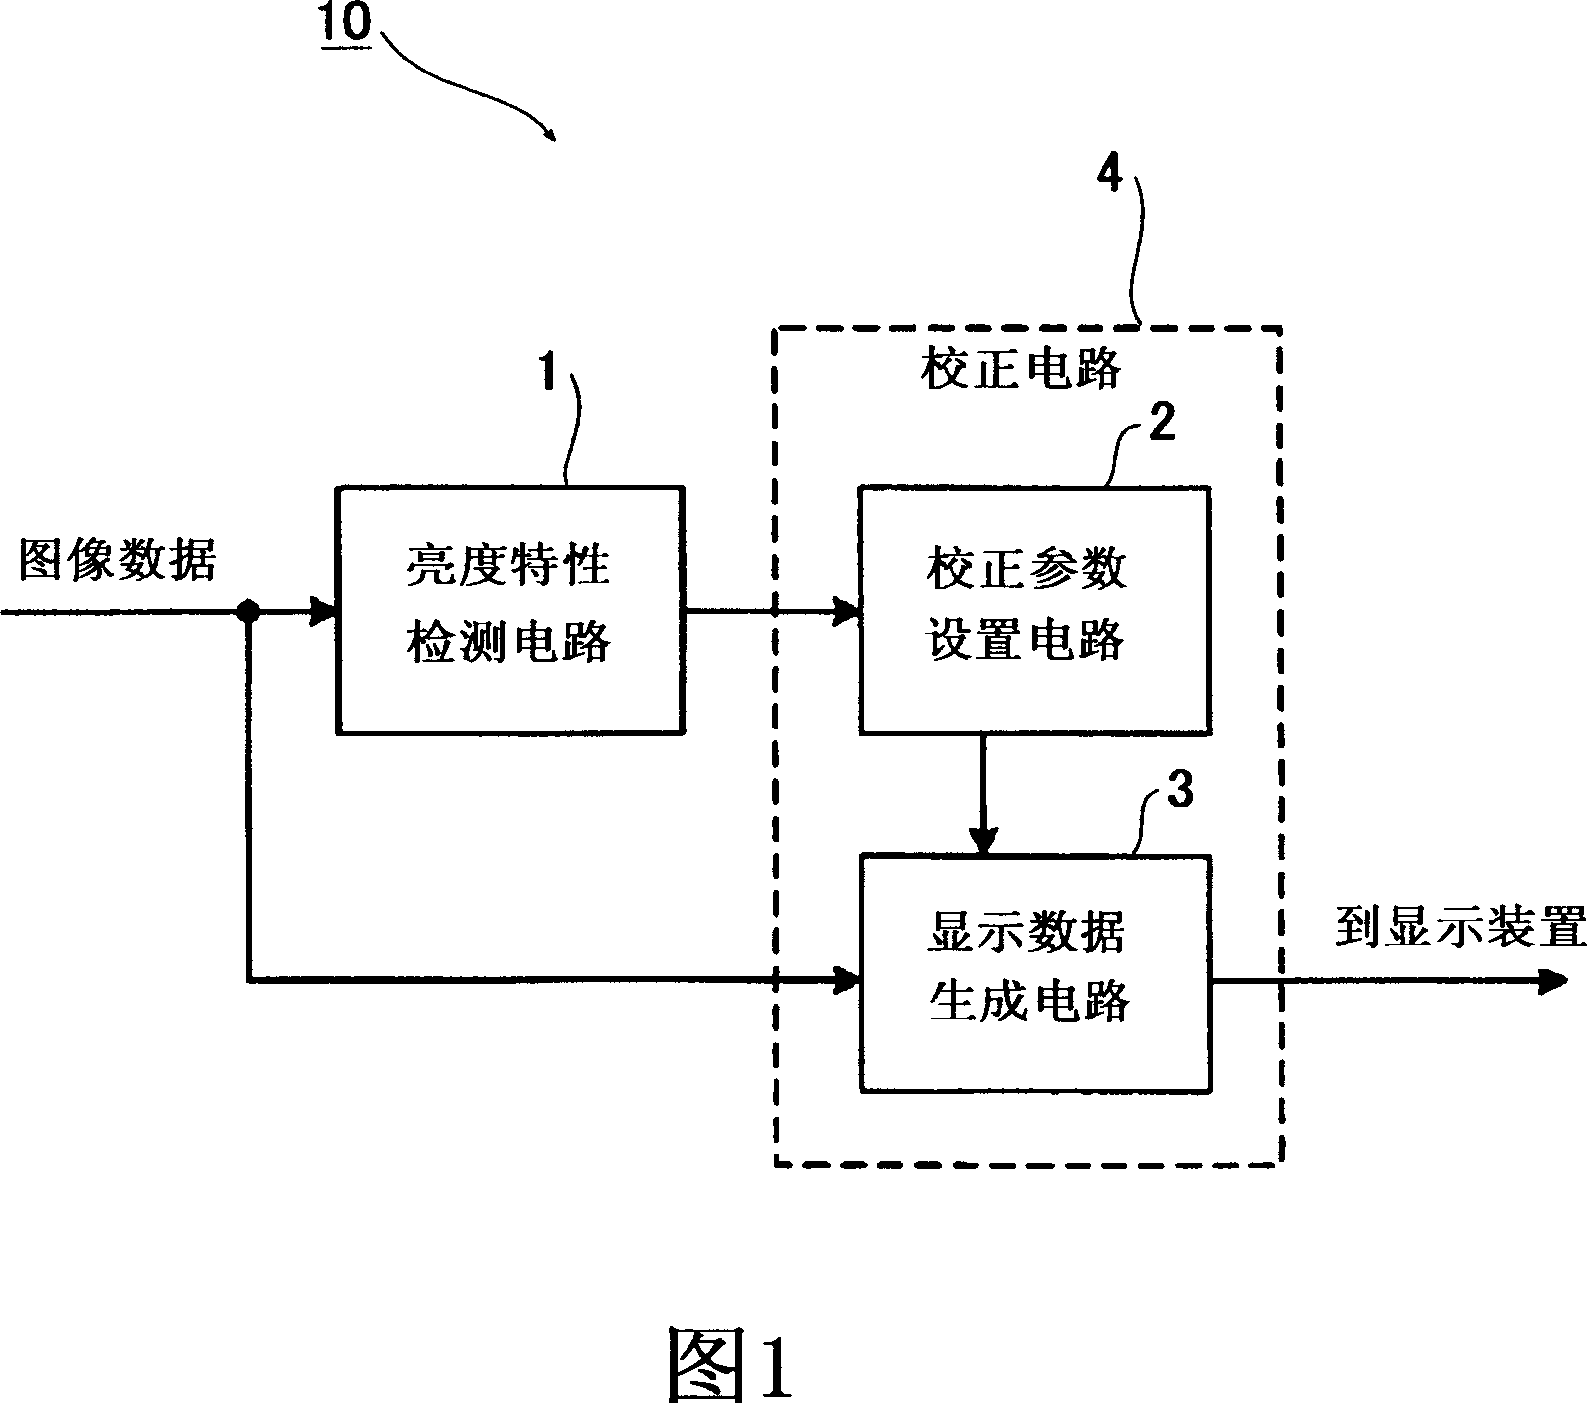 Image data processing apparatus and method of processing image data